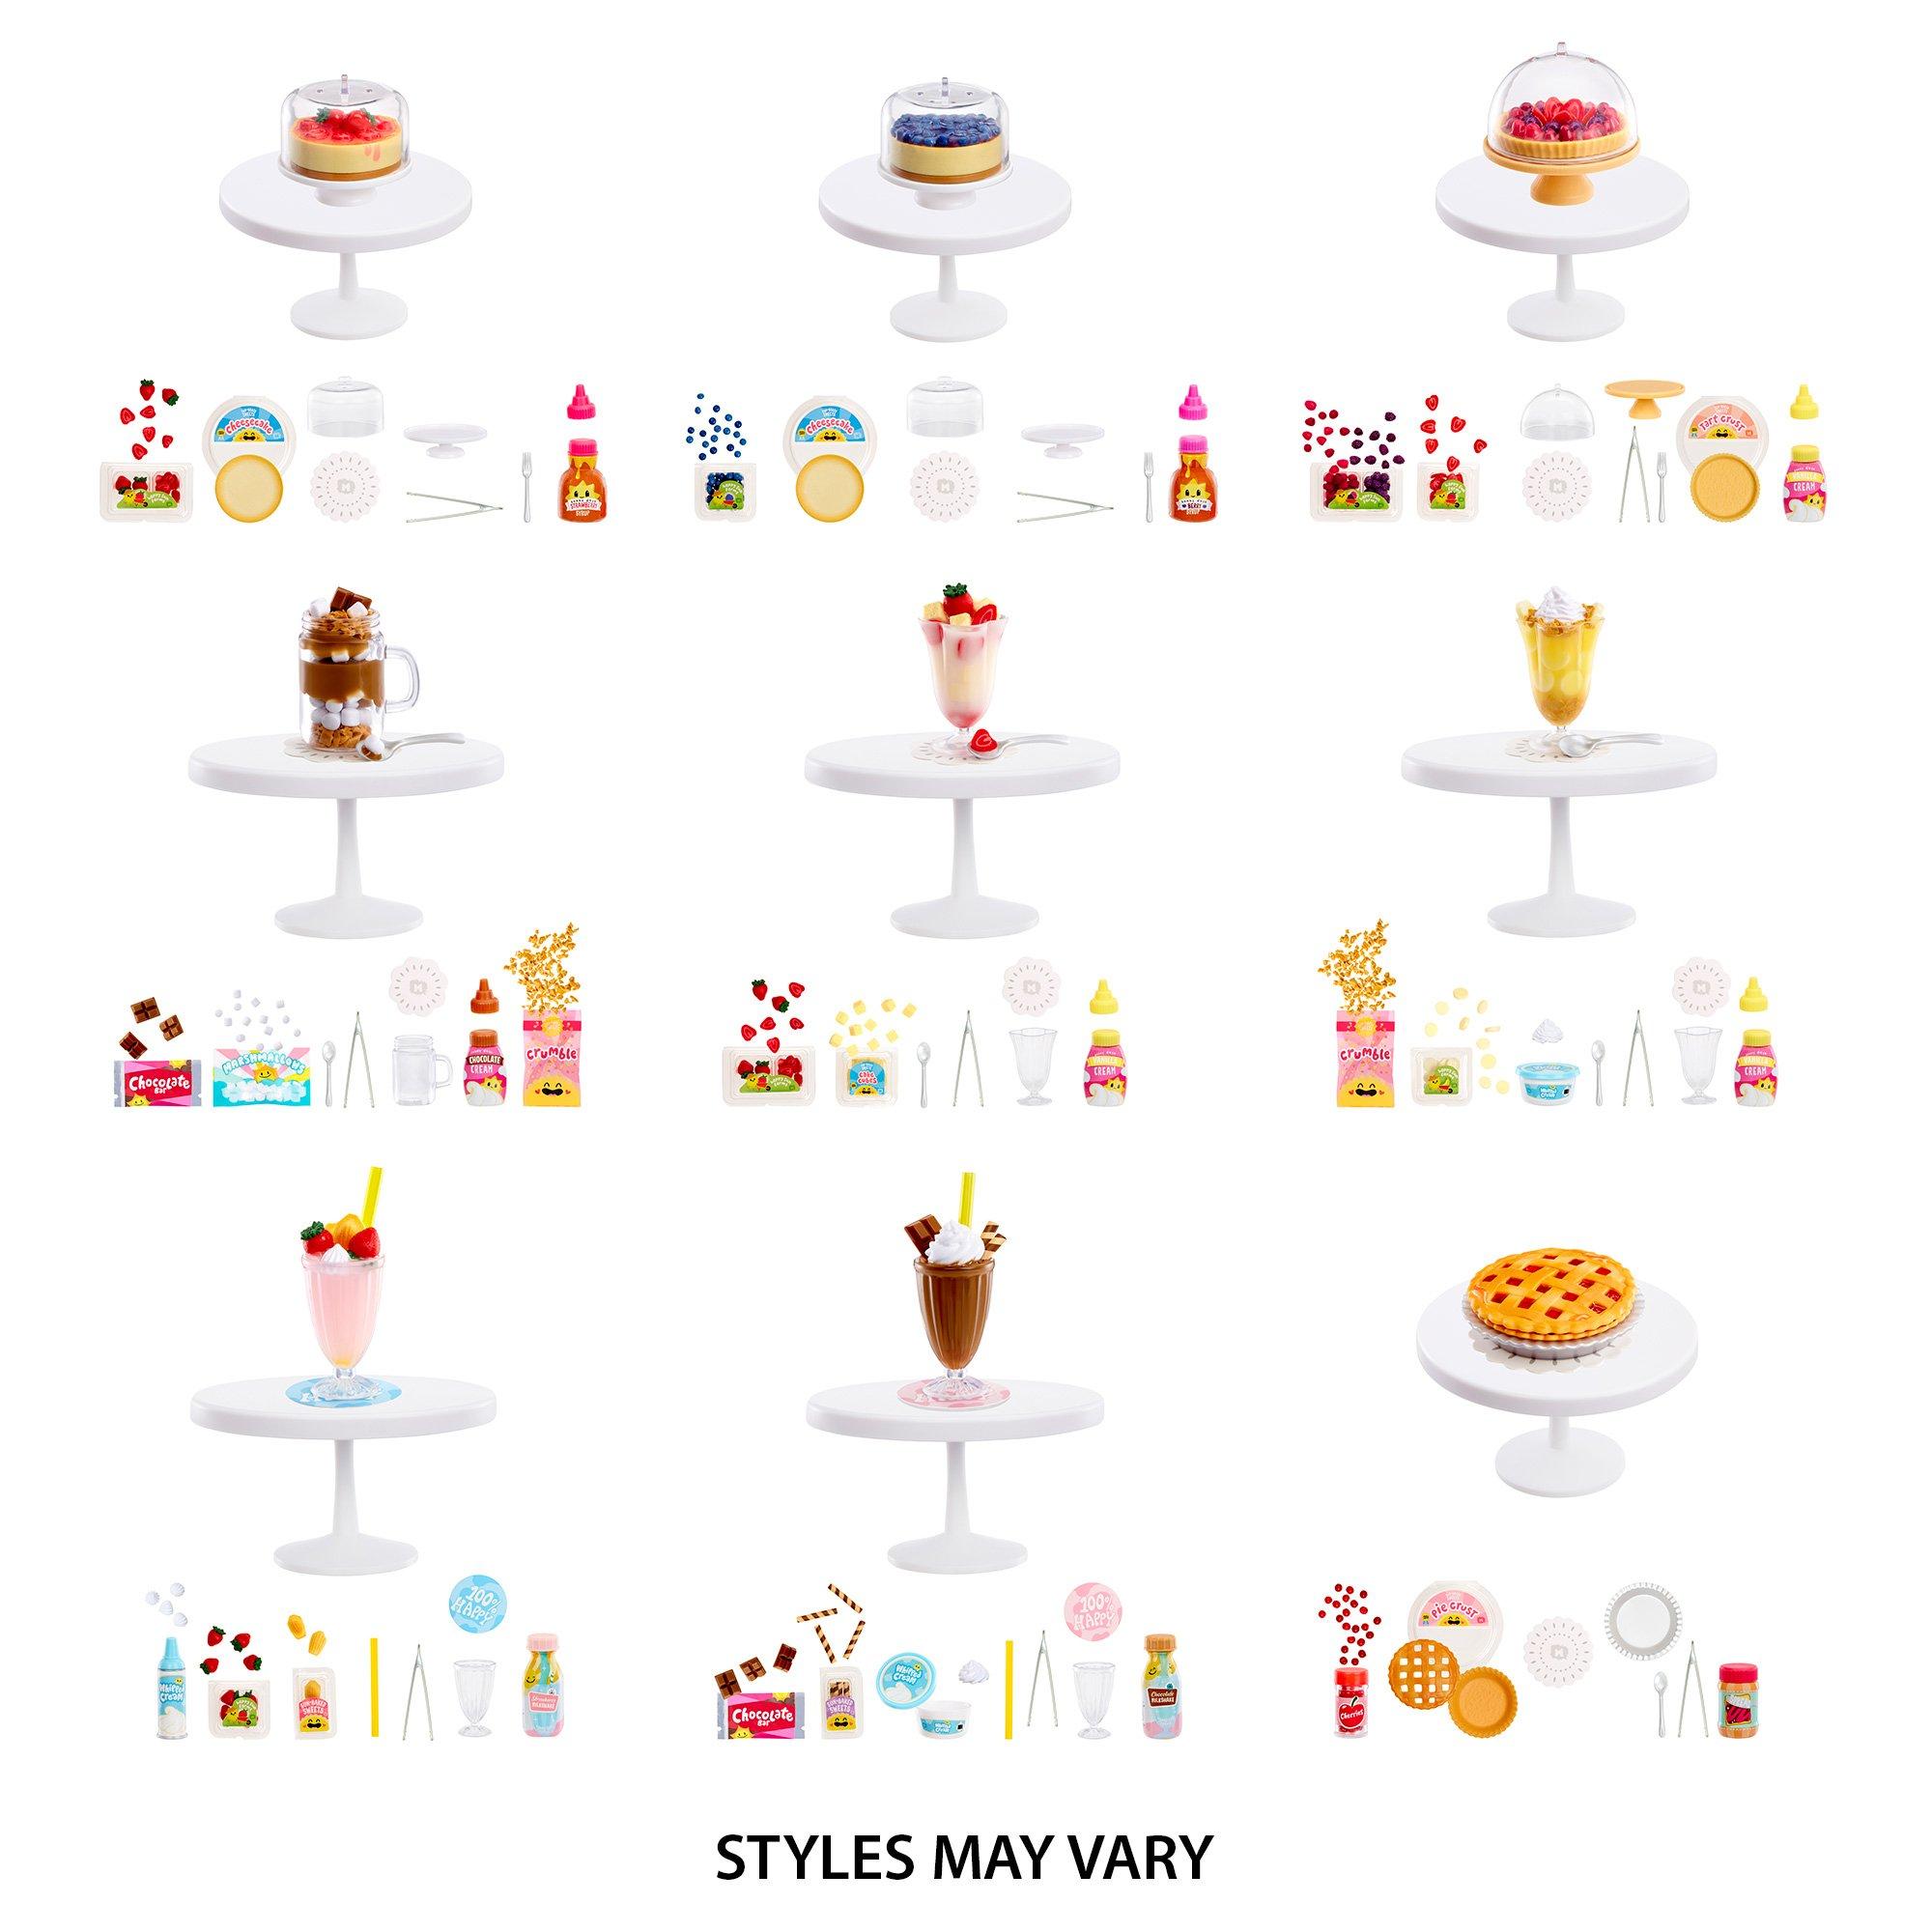 MINI VERSE - How To Complete The Entire Diner Collection 